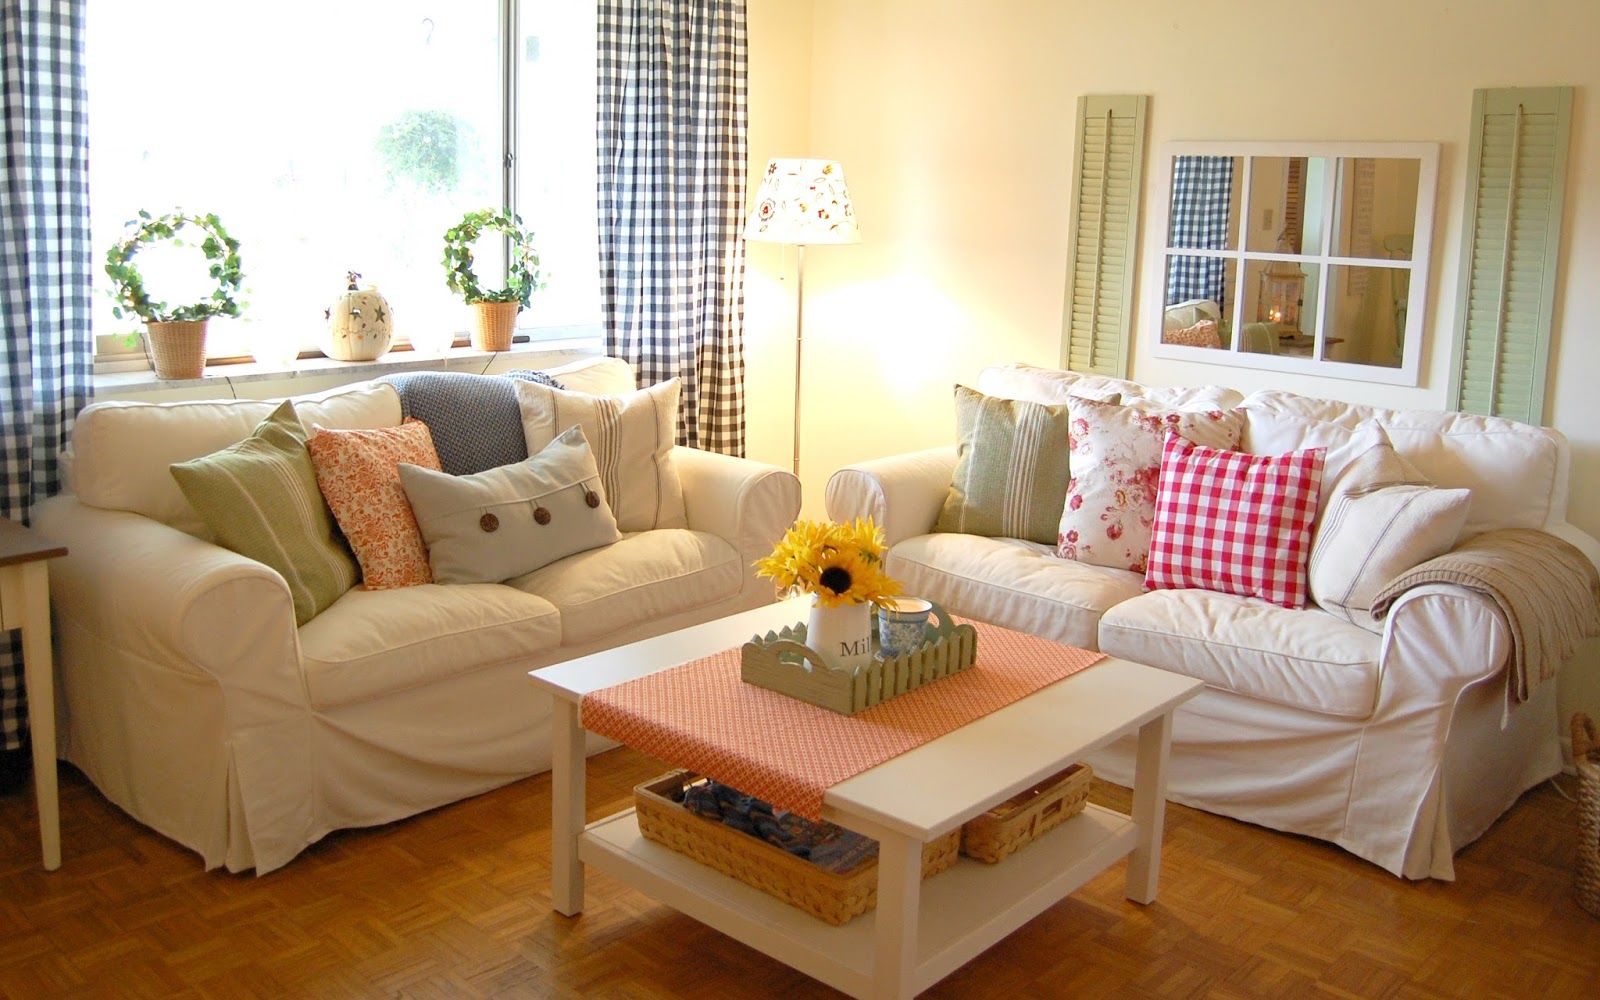 Countrystyle Living Room Design photo - 9